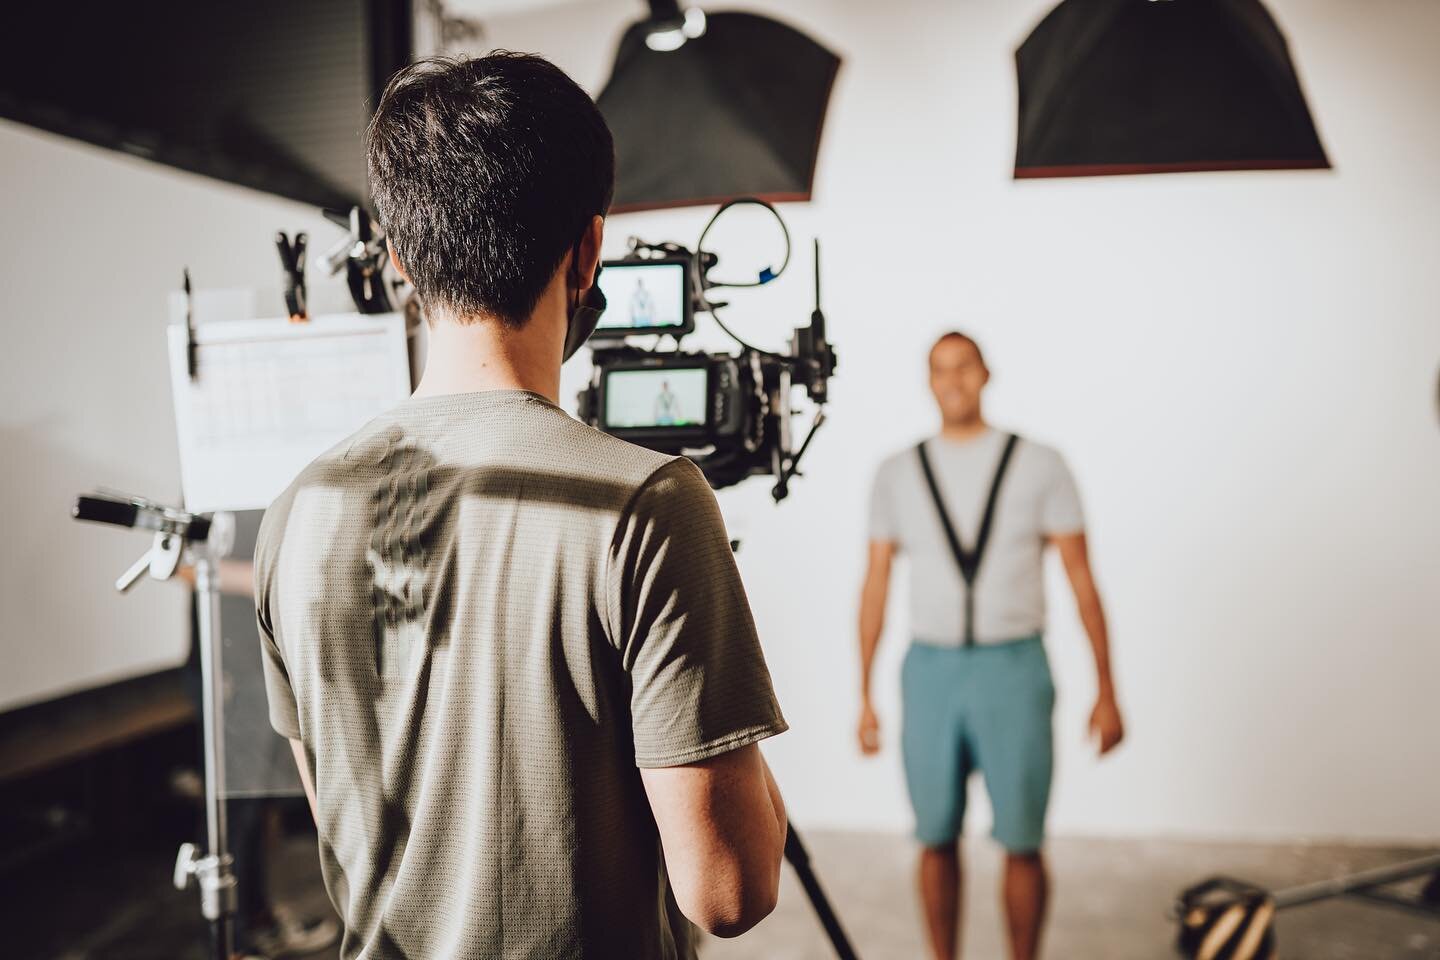 From our shoot with @thehikersco  Matt Morgan demonstrates how to wear HIKERS, an alternative to suspenders.
.
.
📸 @ella.claire.photo
@matt.a.morgan
@forestmurnane
@iaindouch
.
.
.
#productshots #productvideo #facebookads #videoads #harmonbrothers #